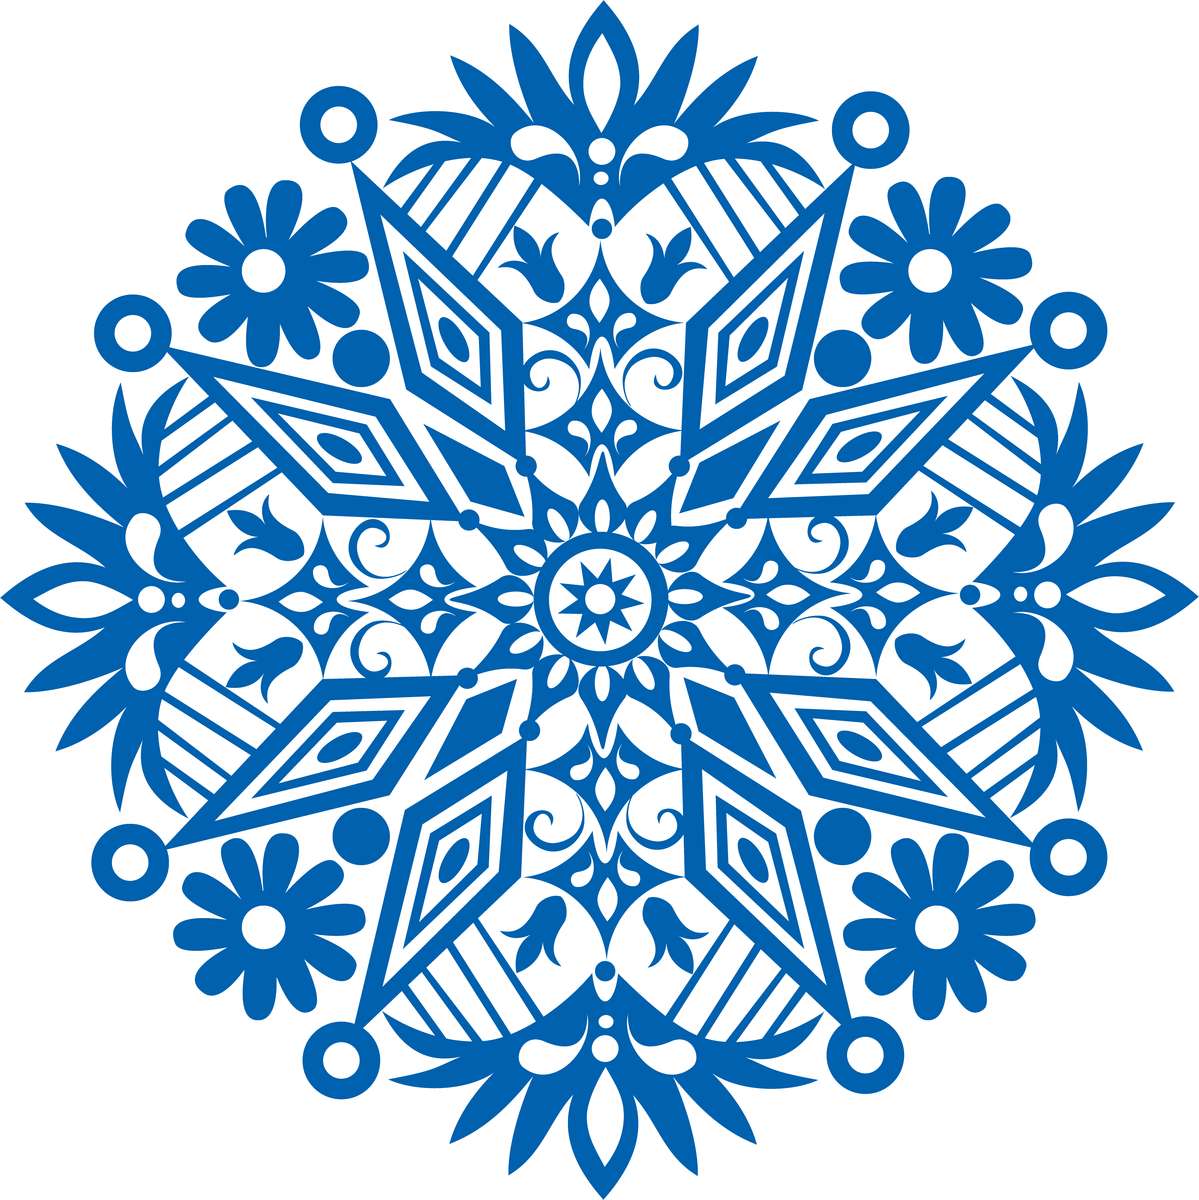 Snowflake puzzle online from photo